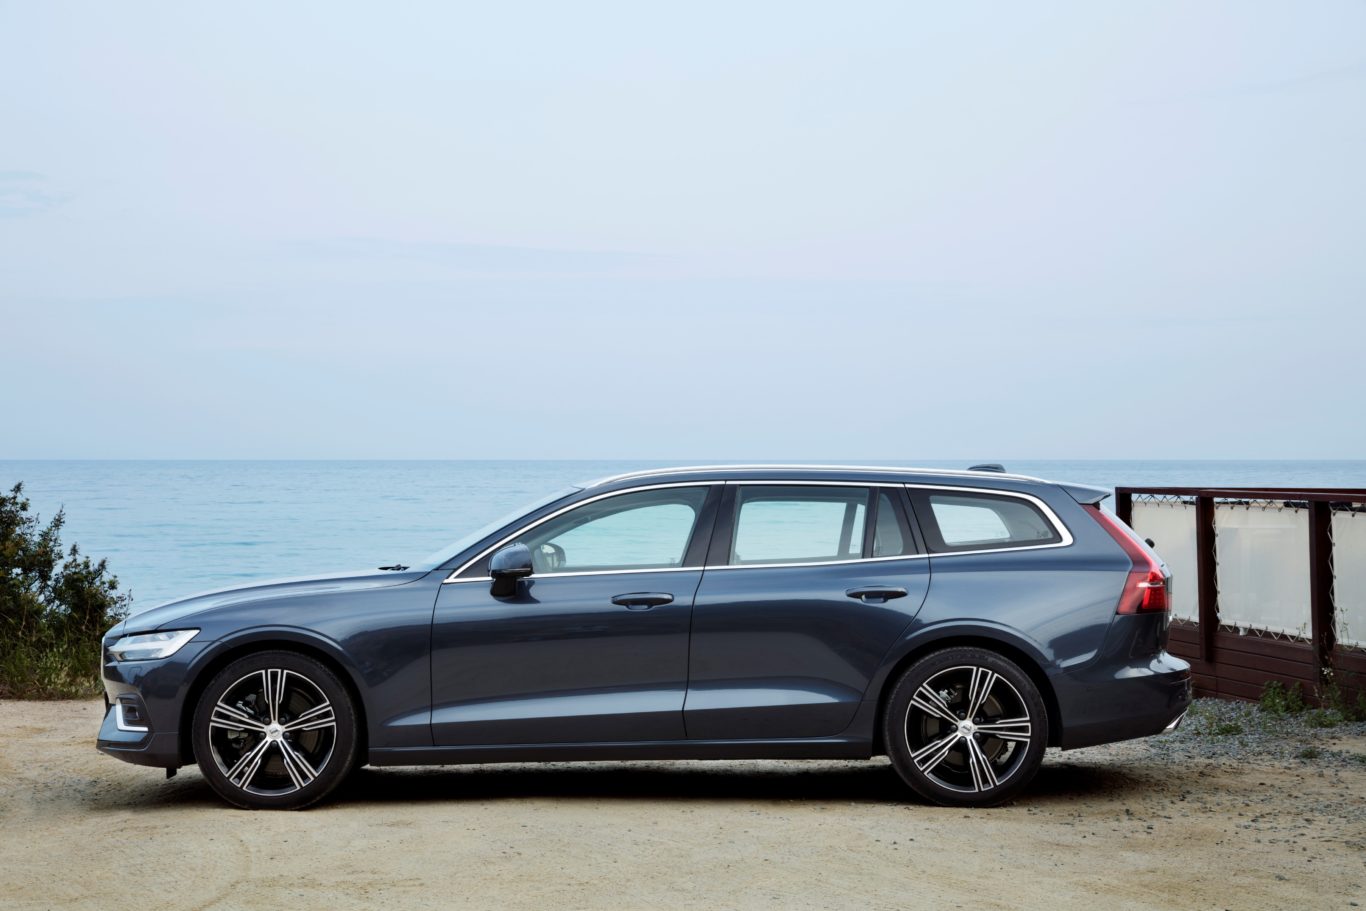 The V60 features many design cues from the larger V90